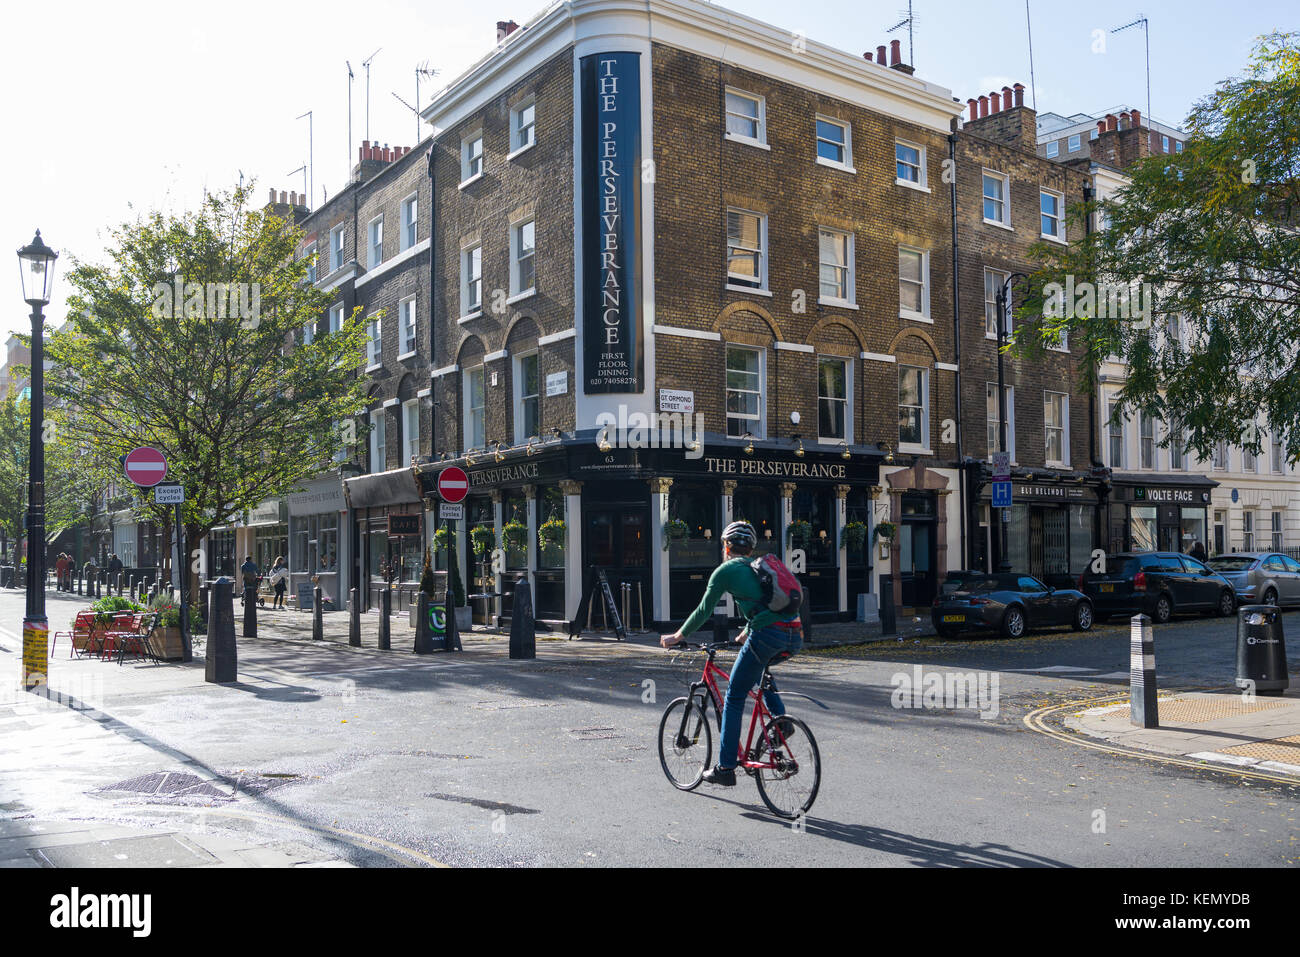 The Perseverance public house in Lambs Conduit Street, Bloomsbury, London. Stock Photo